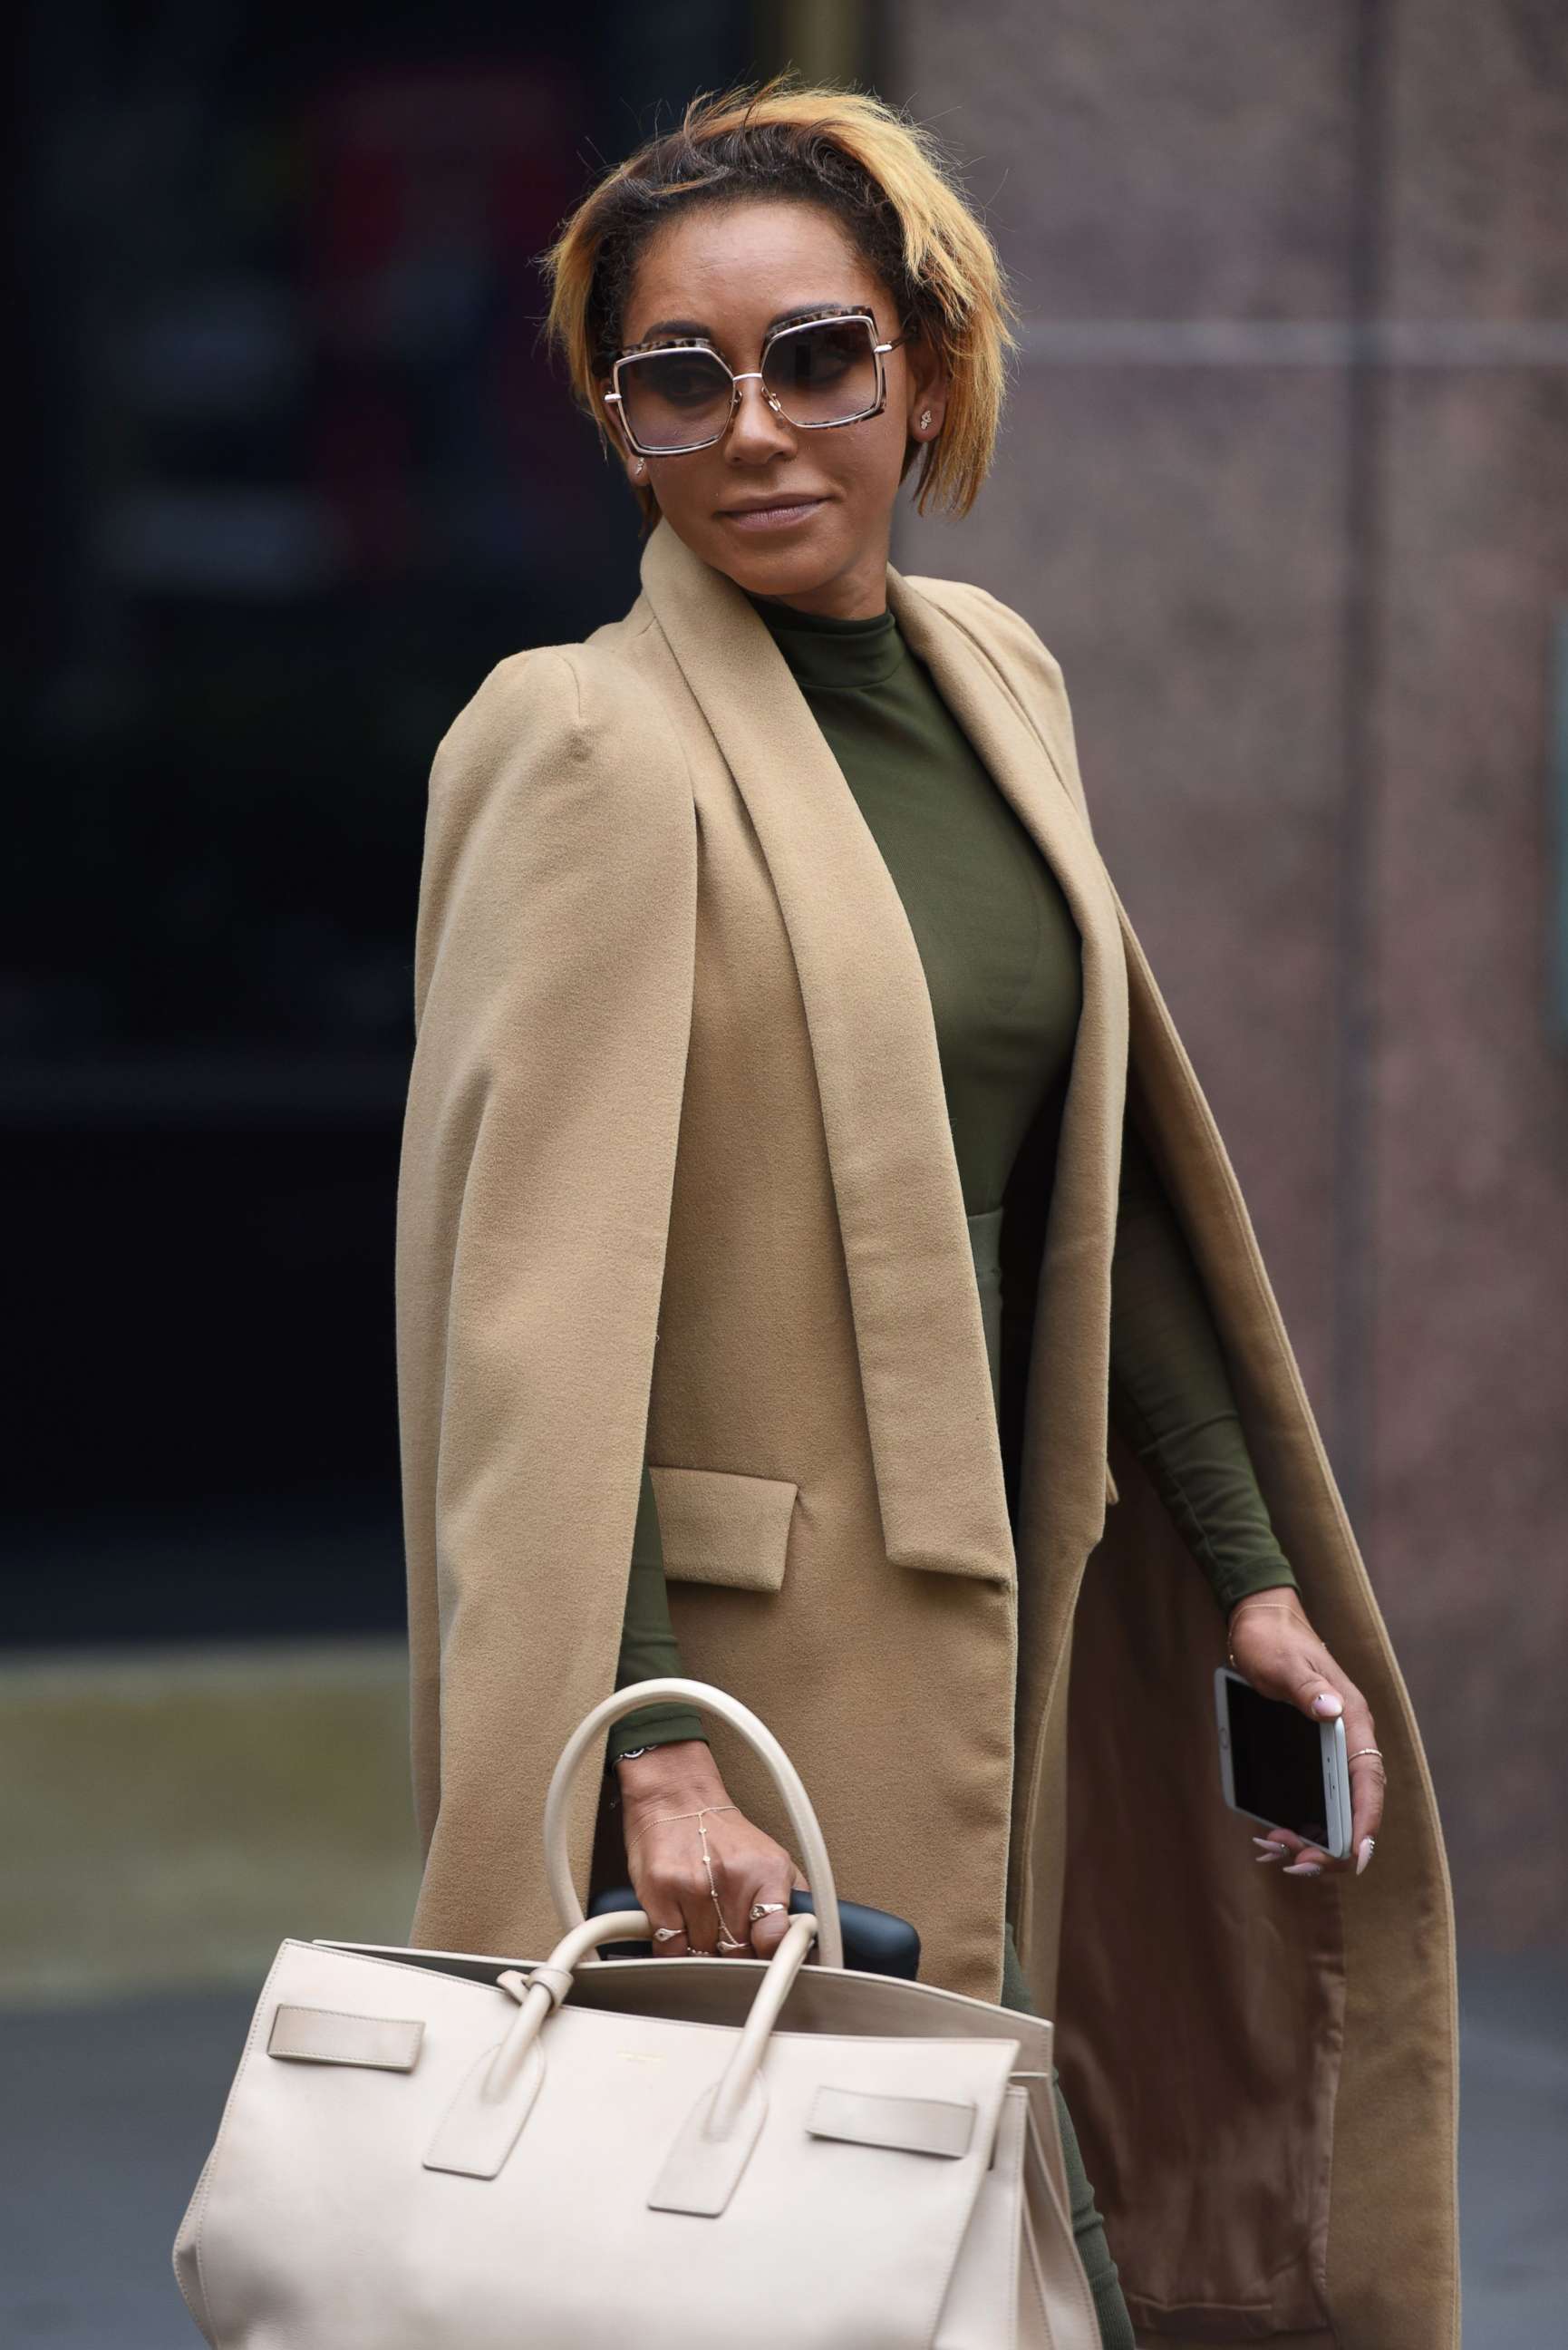 PHOTO: Melanie Brown (Spice Girl Mel B) leaves Los Angeles Superior Court Stanley Mosk Courthouse, in Los Angeles, Nov. 9, 2017. 